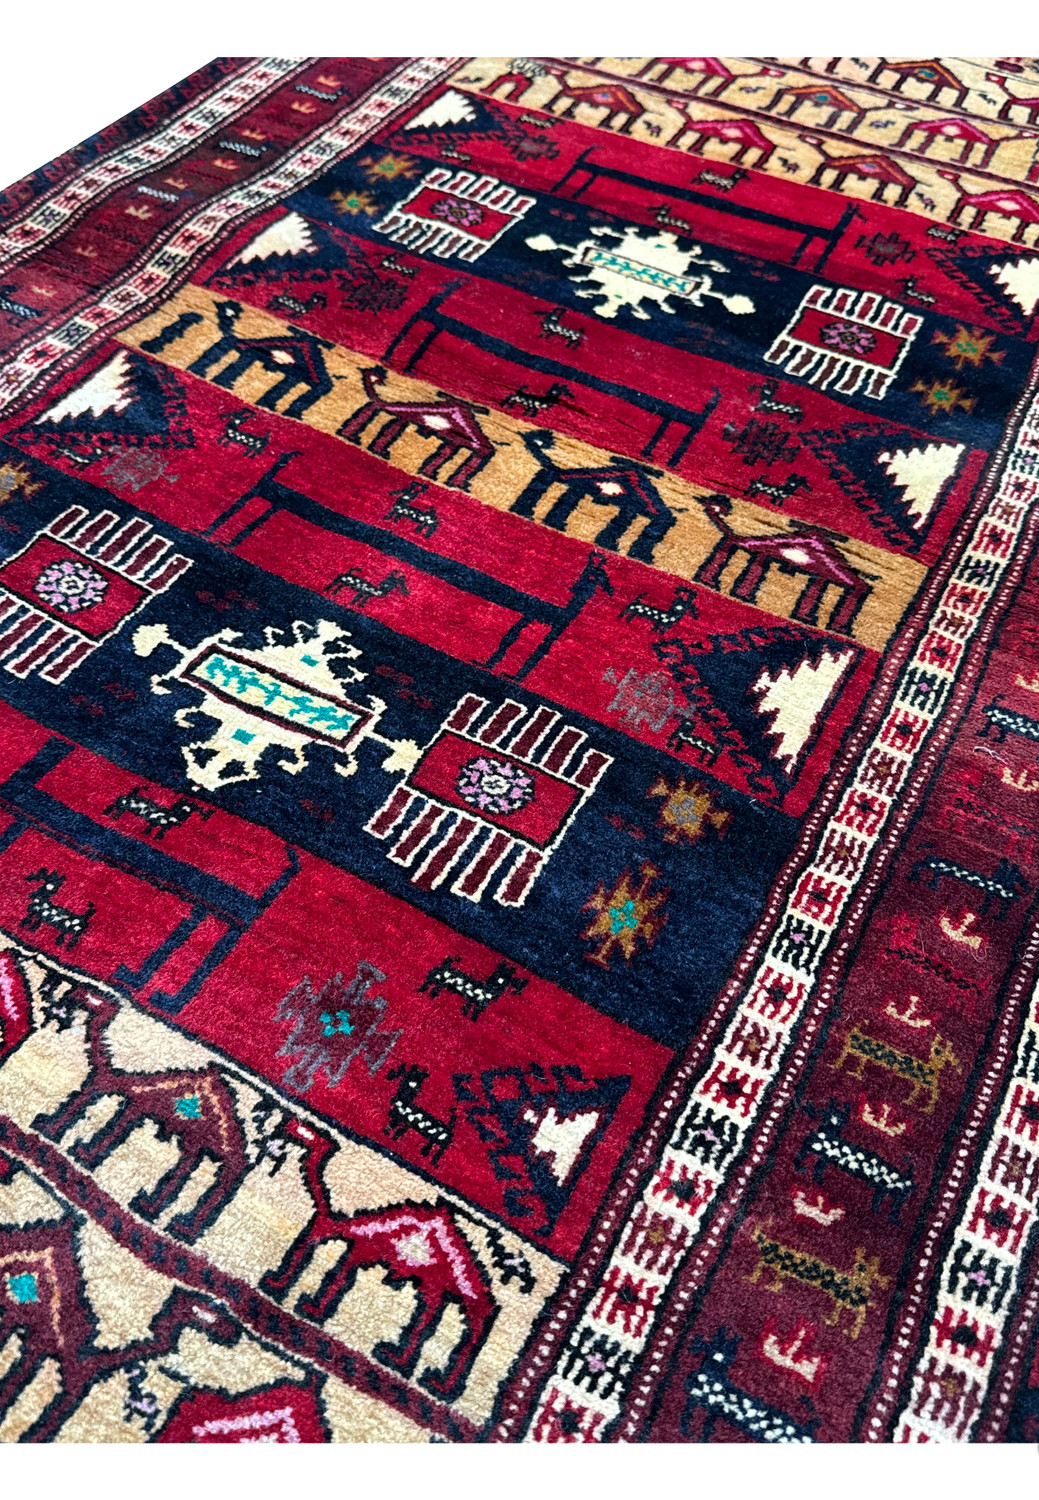 Angled close-up showcasing the texture and weave of a Persian Baluch Tribal rug with deep red and dark blue patterns